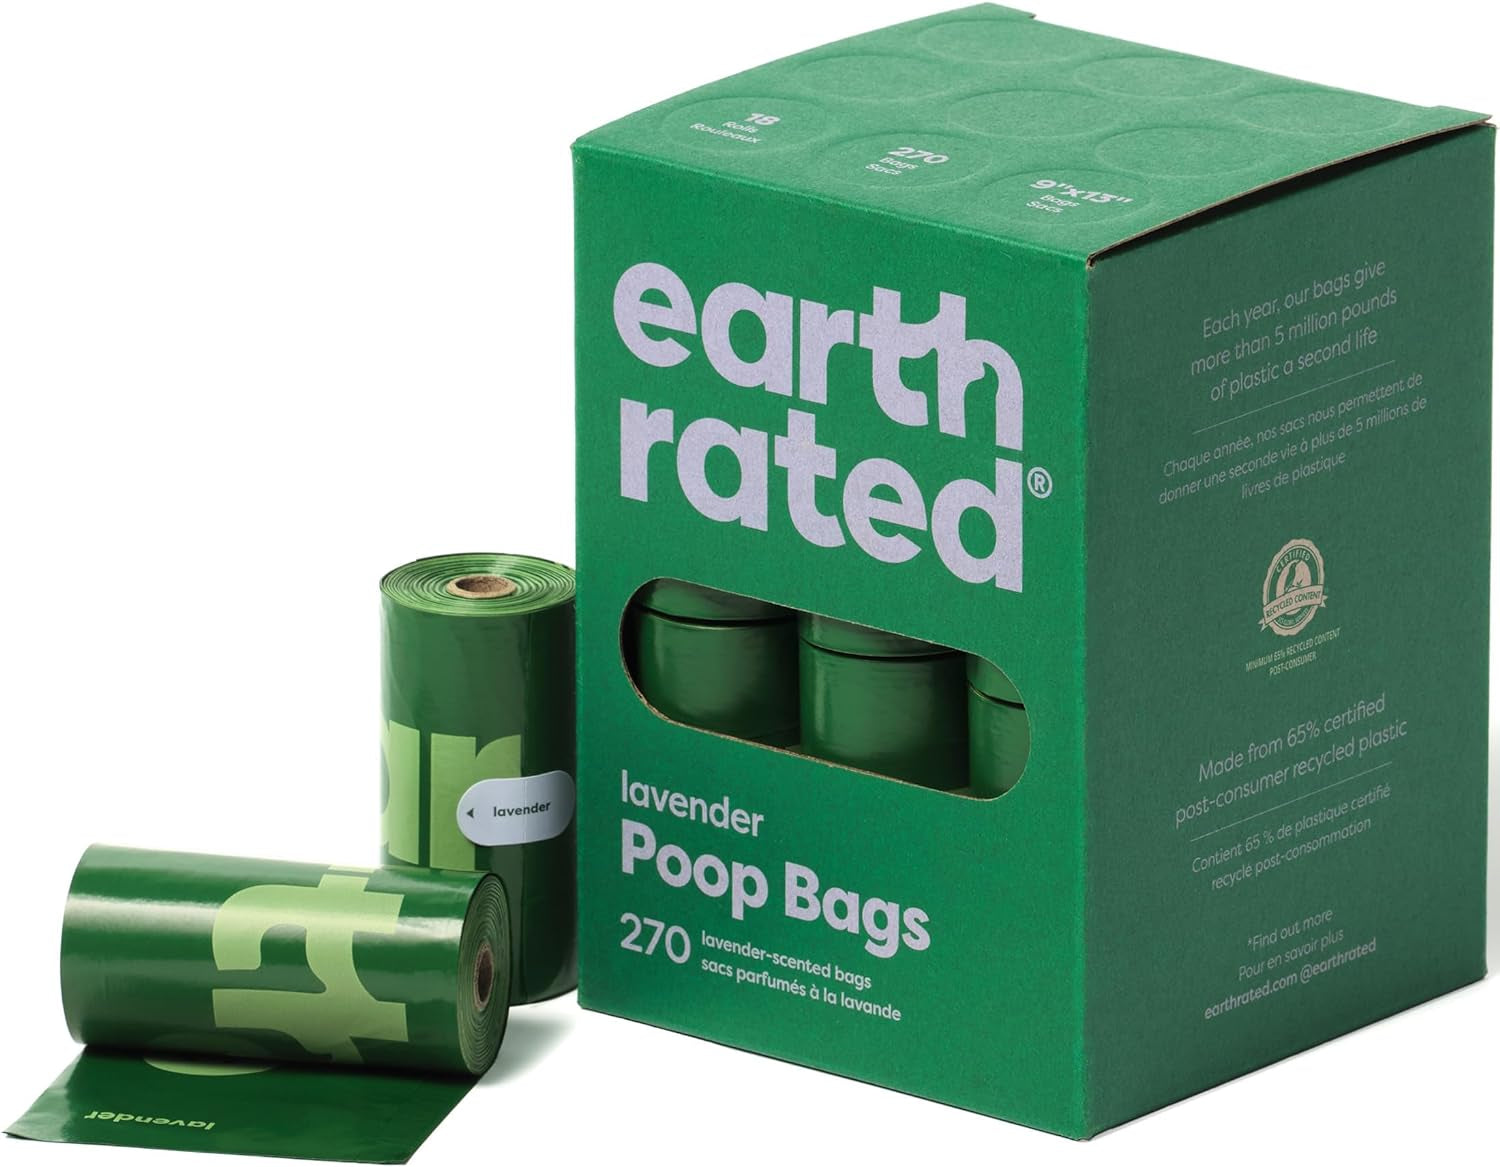 Earth Rated Dog Poop Bags - Lavender Scented, 270 Count (Leak-Proof & Extra Thick)